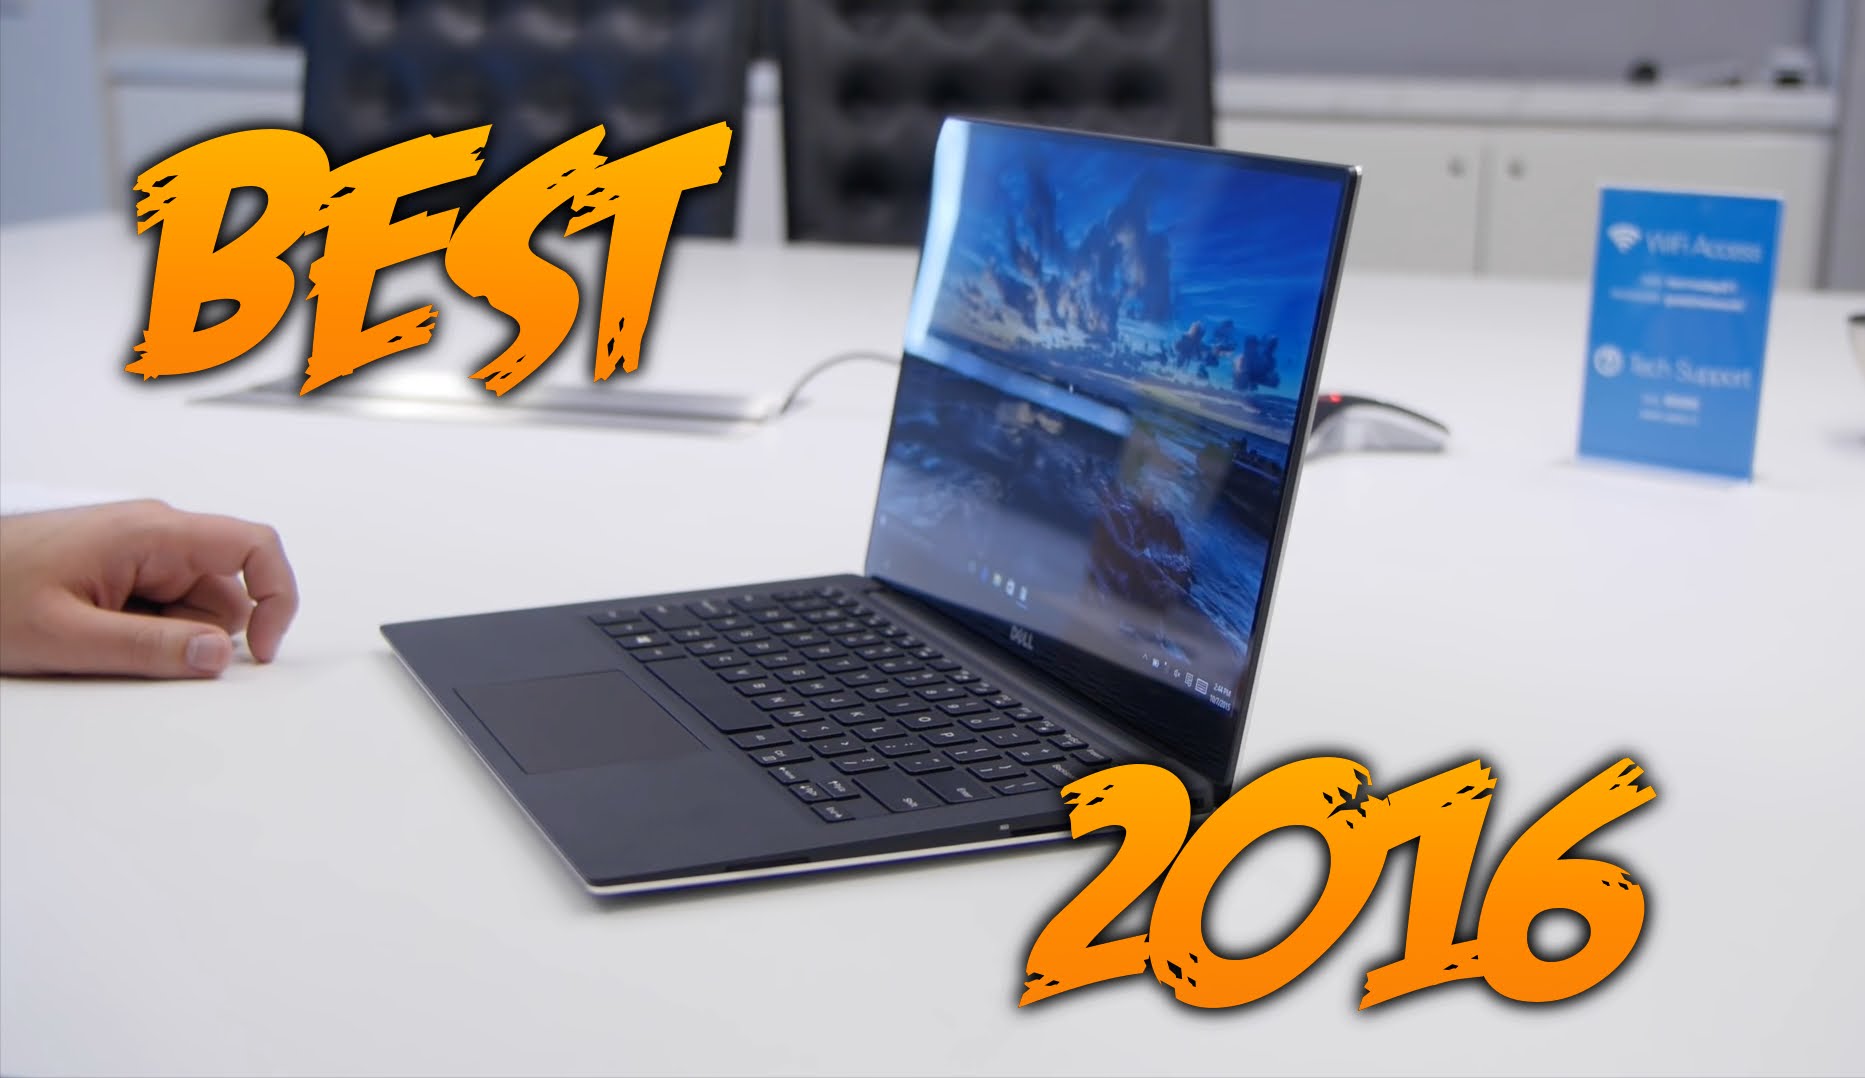 Control Many temperature Top 5 Best Laptops of 2016